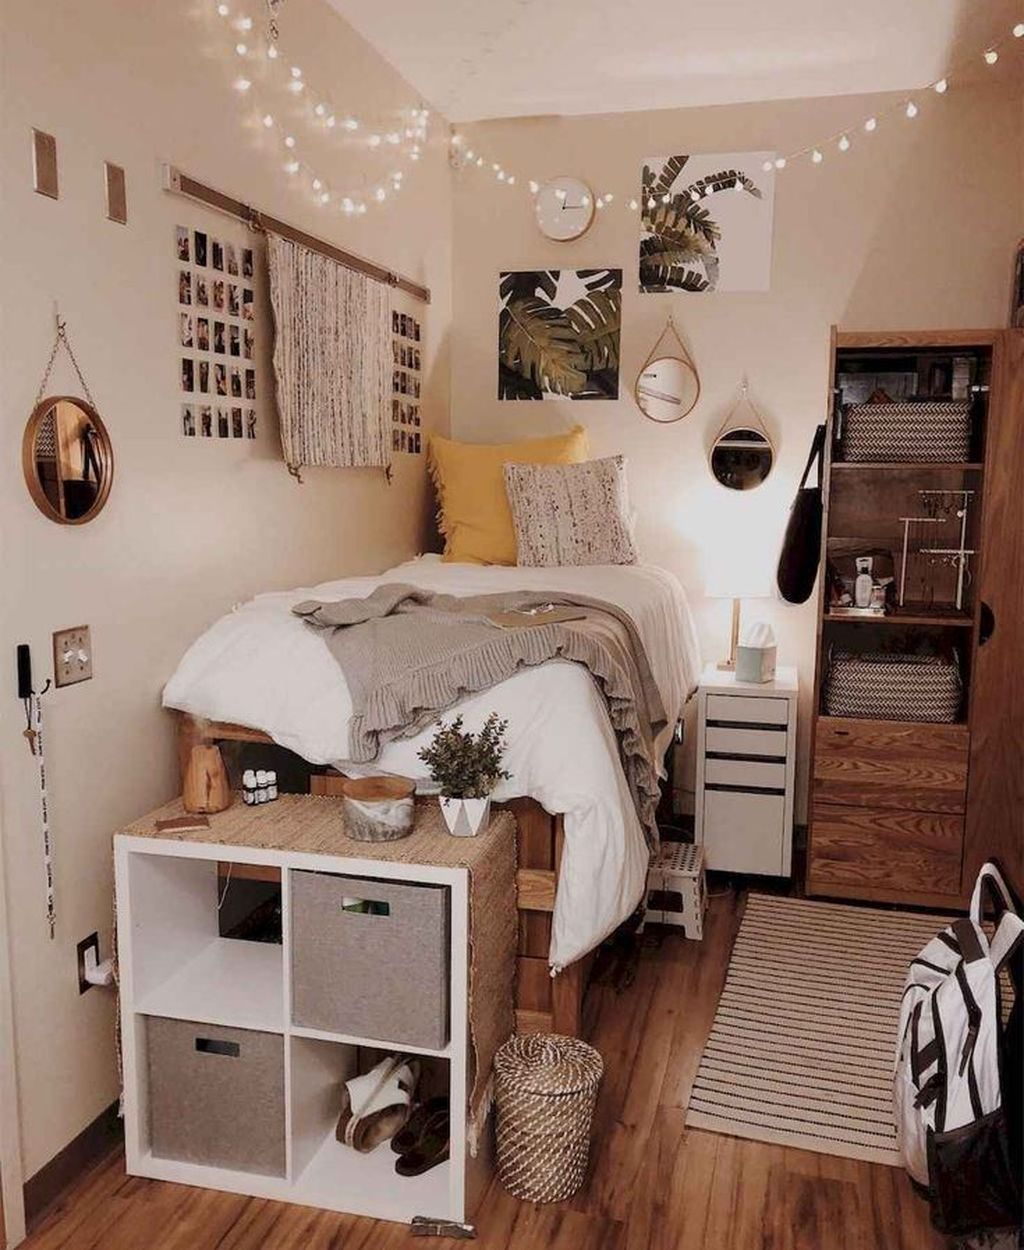 How can I decorate my room with simple things at home?